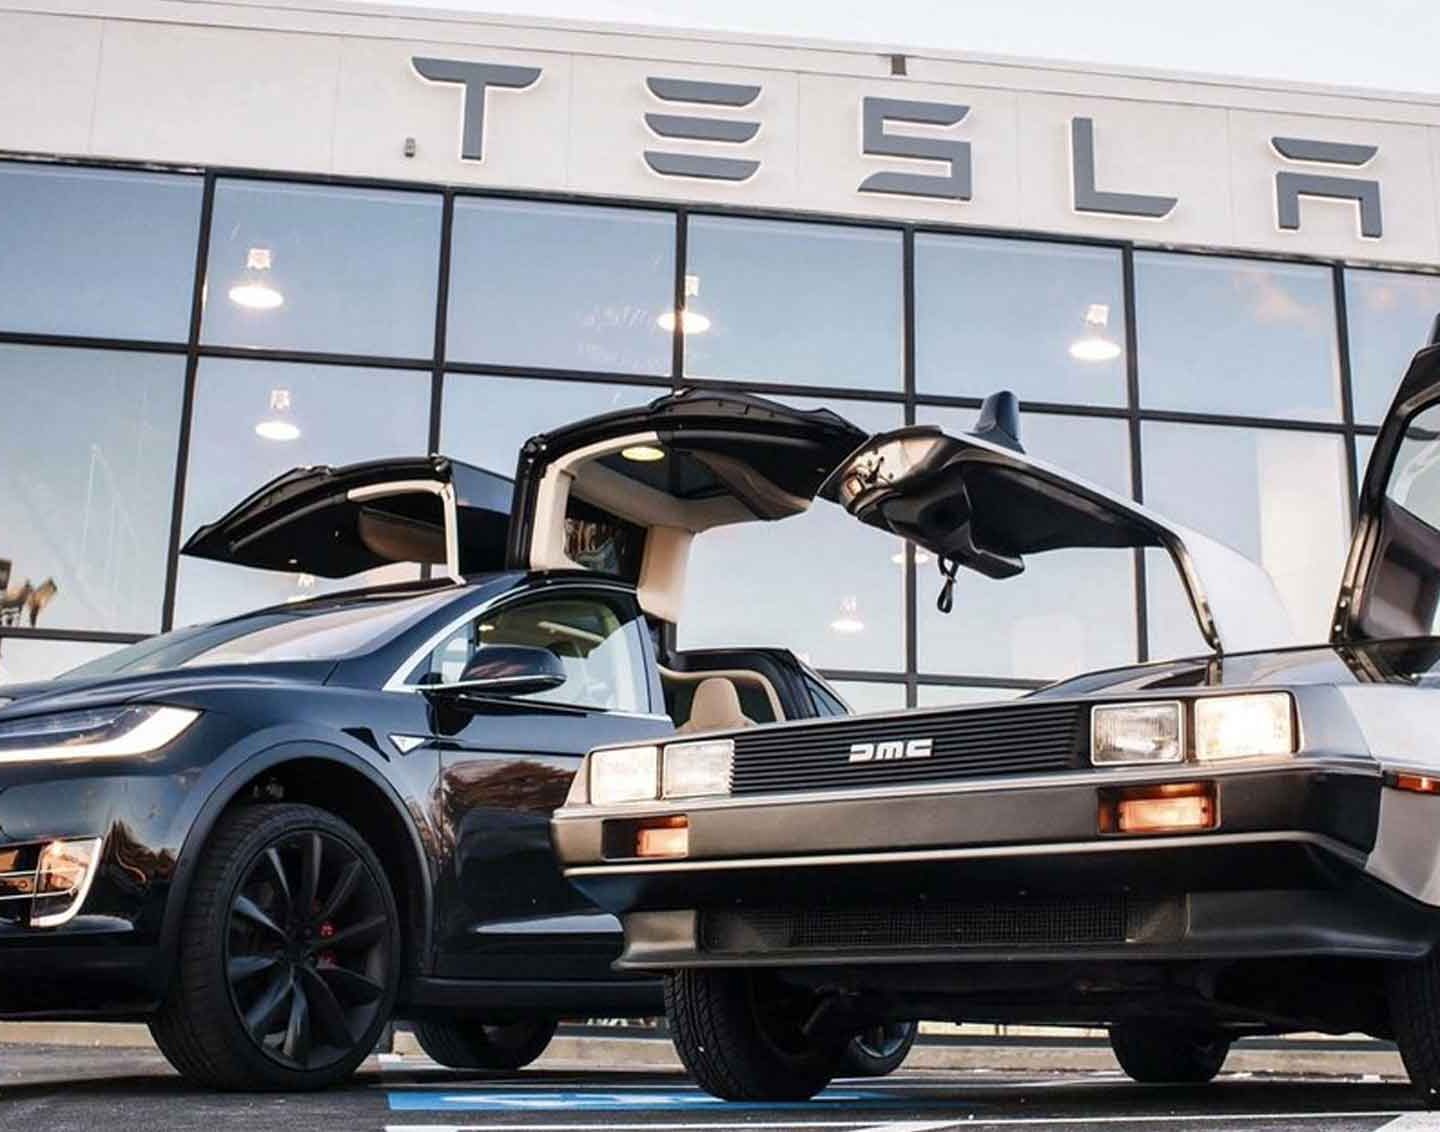 Quora: “Is it possible that Tesla will eventually be regarded as the DeLorean of this period of automotive history?”